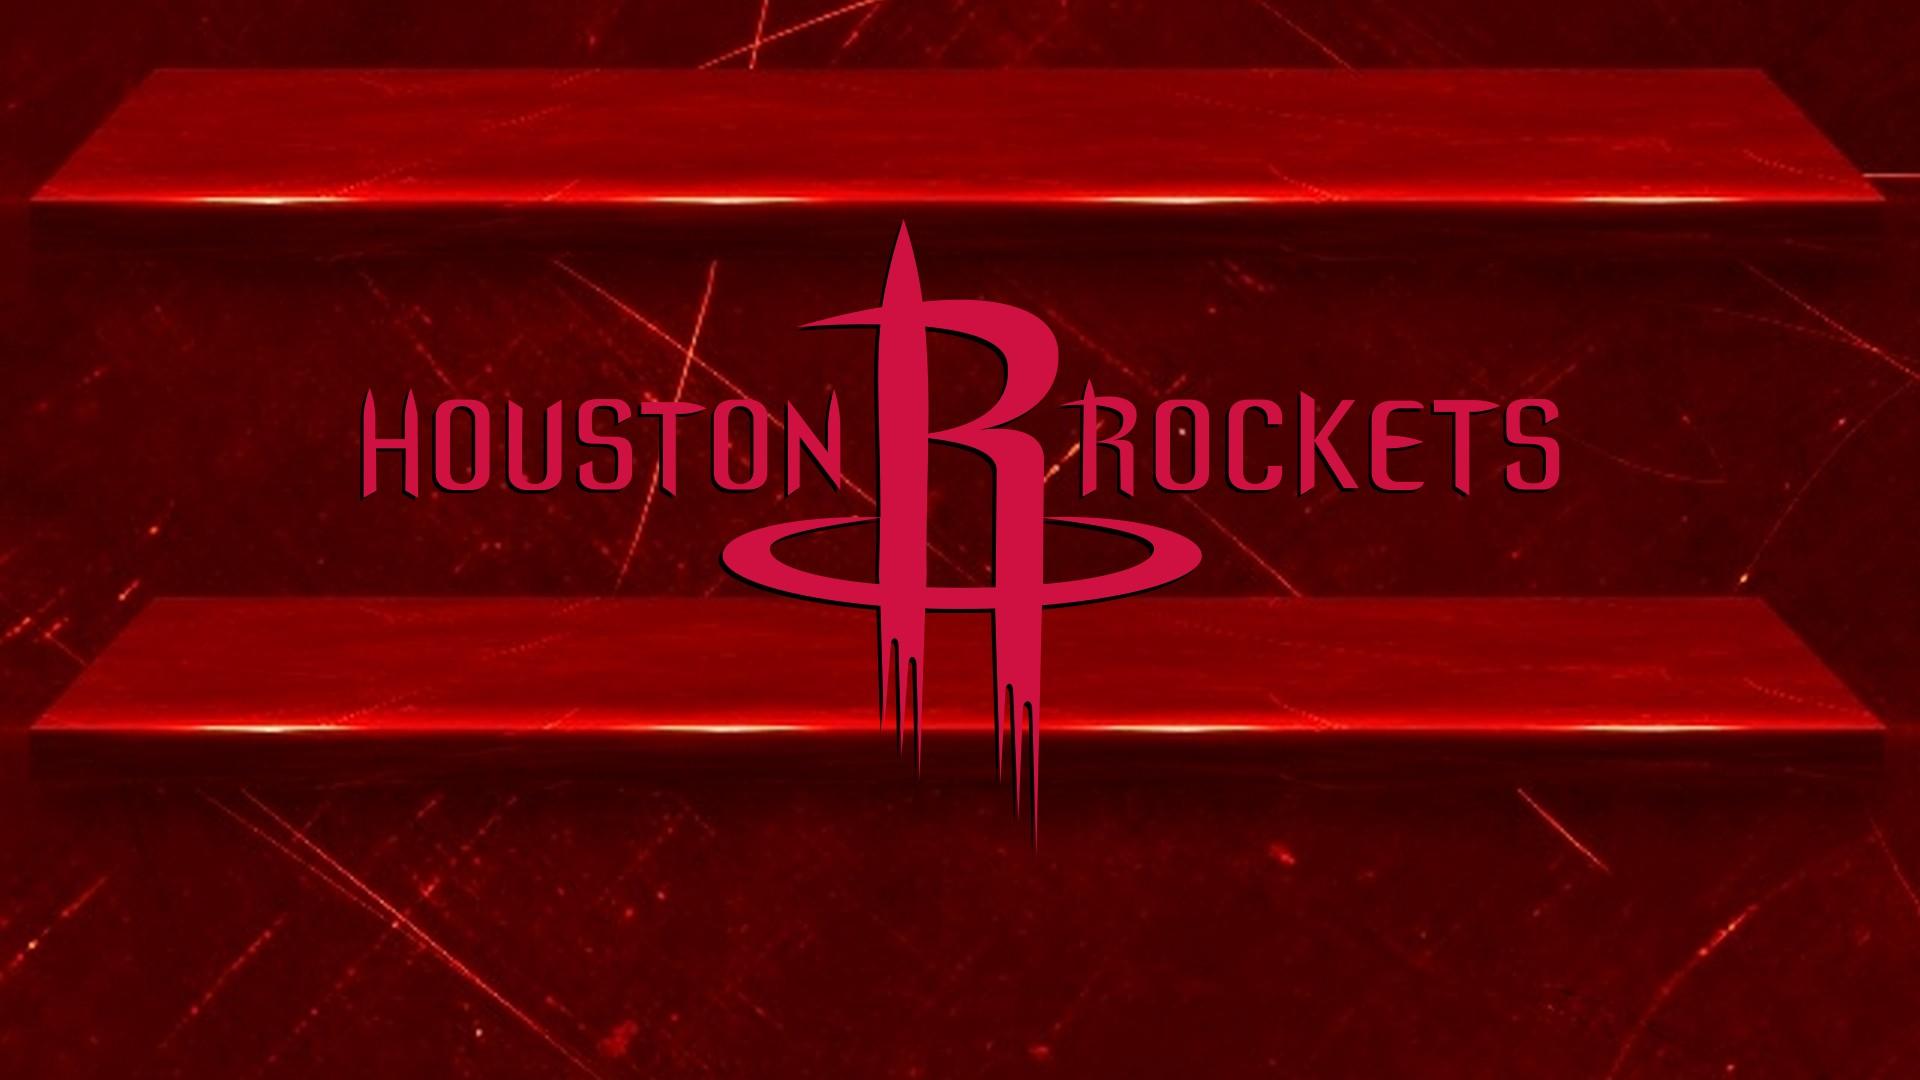 Houston Basketball Desktop Wallpapers with image dimensions 1920x1080 pixel. You can make this wallpaper for your Desktop Computer Backgrounds, Windows or Mac Screensavers, iPhone Lock screen, Tablet or Android and another Mobile Phone device